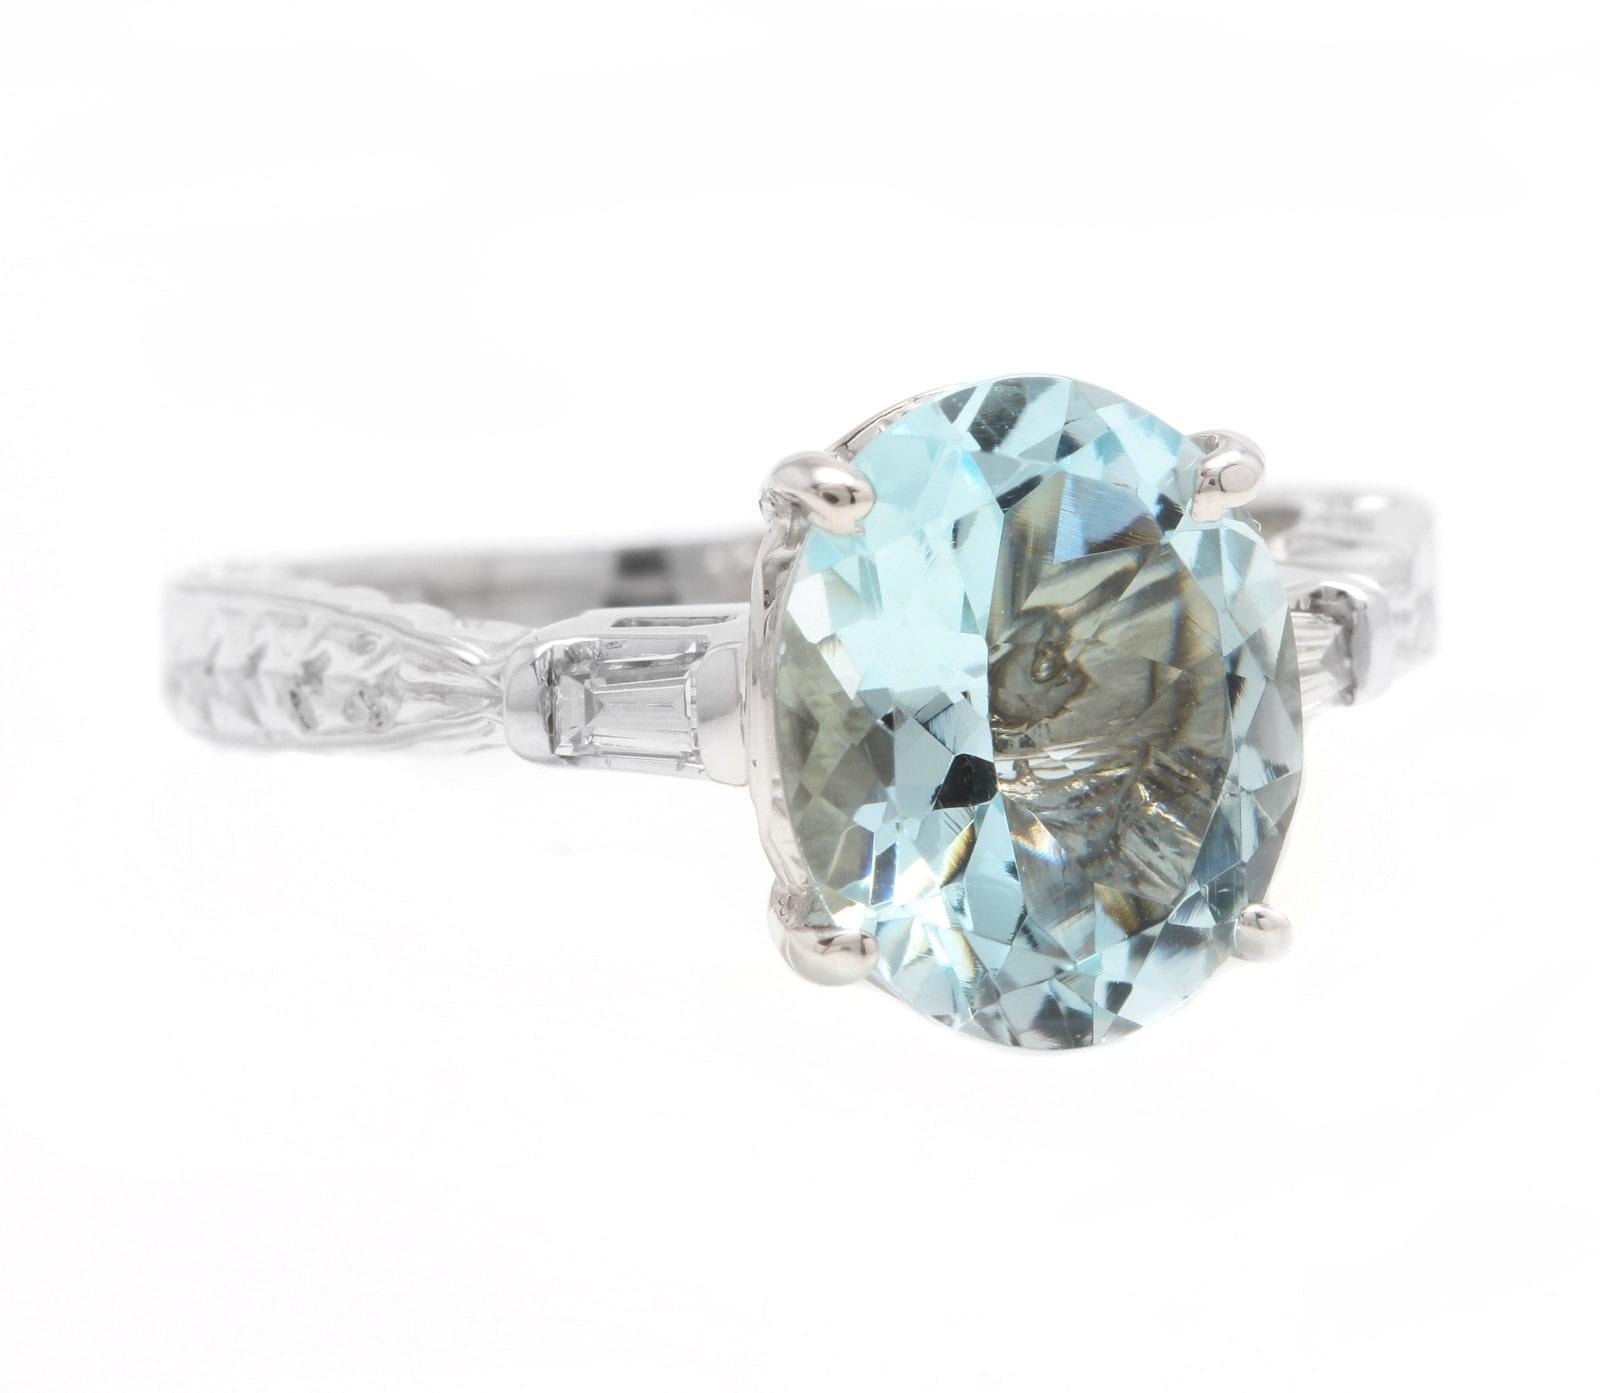 3.14 Carats Exquisite Natural Aquamarine and Diamond 14K Solid White Gold Ring

Suggested Replacement Value Approx. $4,000.00

Total Aquamarine Weight is: Approx. 3.00 Carats 

 Aquamarine Measures: Approx. 11.00 x 9.00mm

Aquamarine Treatment: